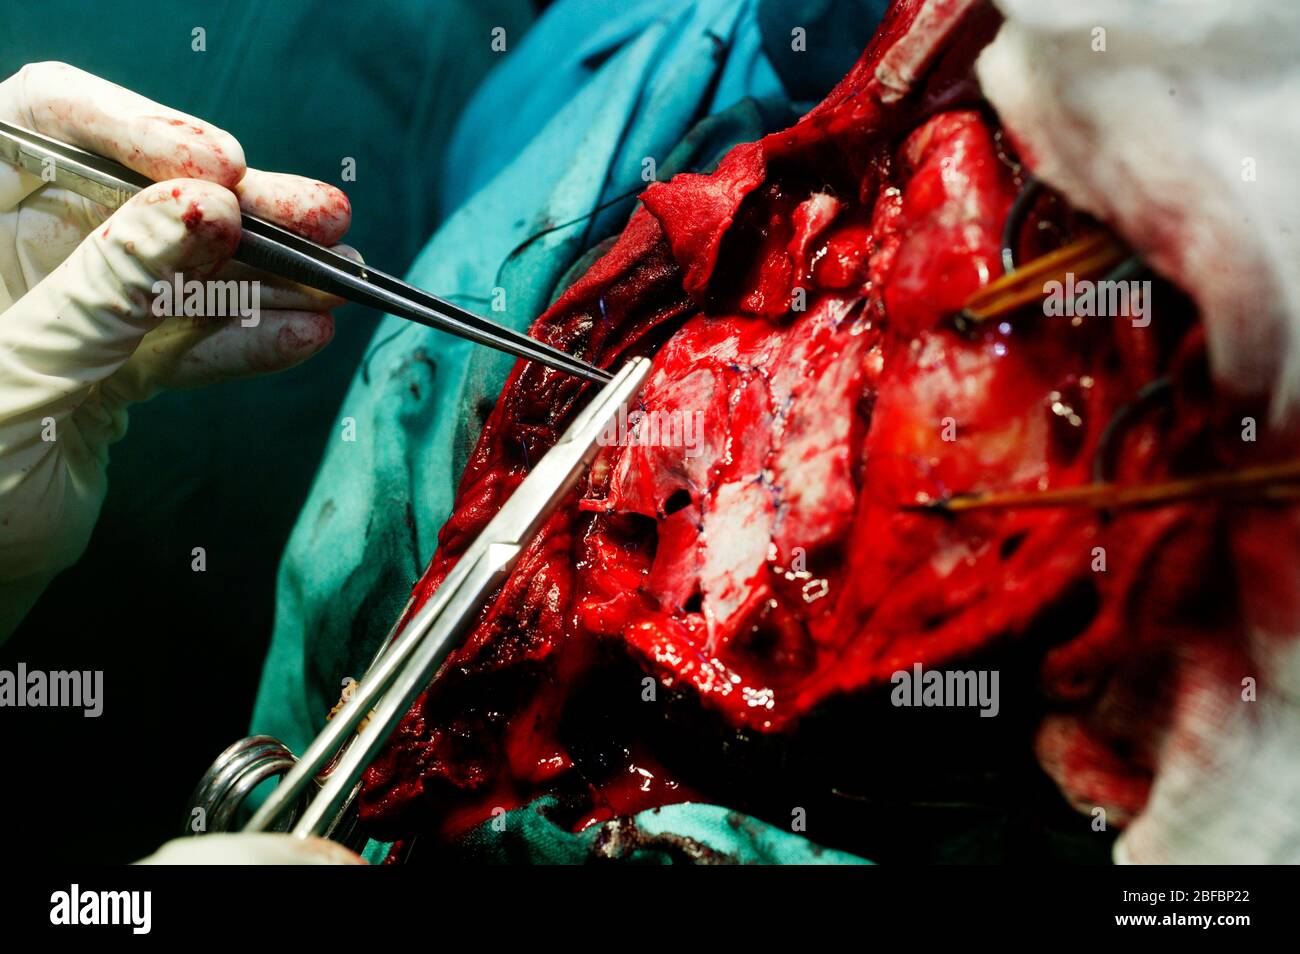 A neurosurgeon operating on a patient's brain starts to close the wound. Stock Photo